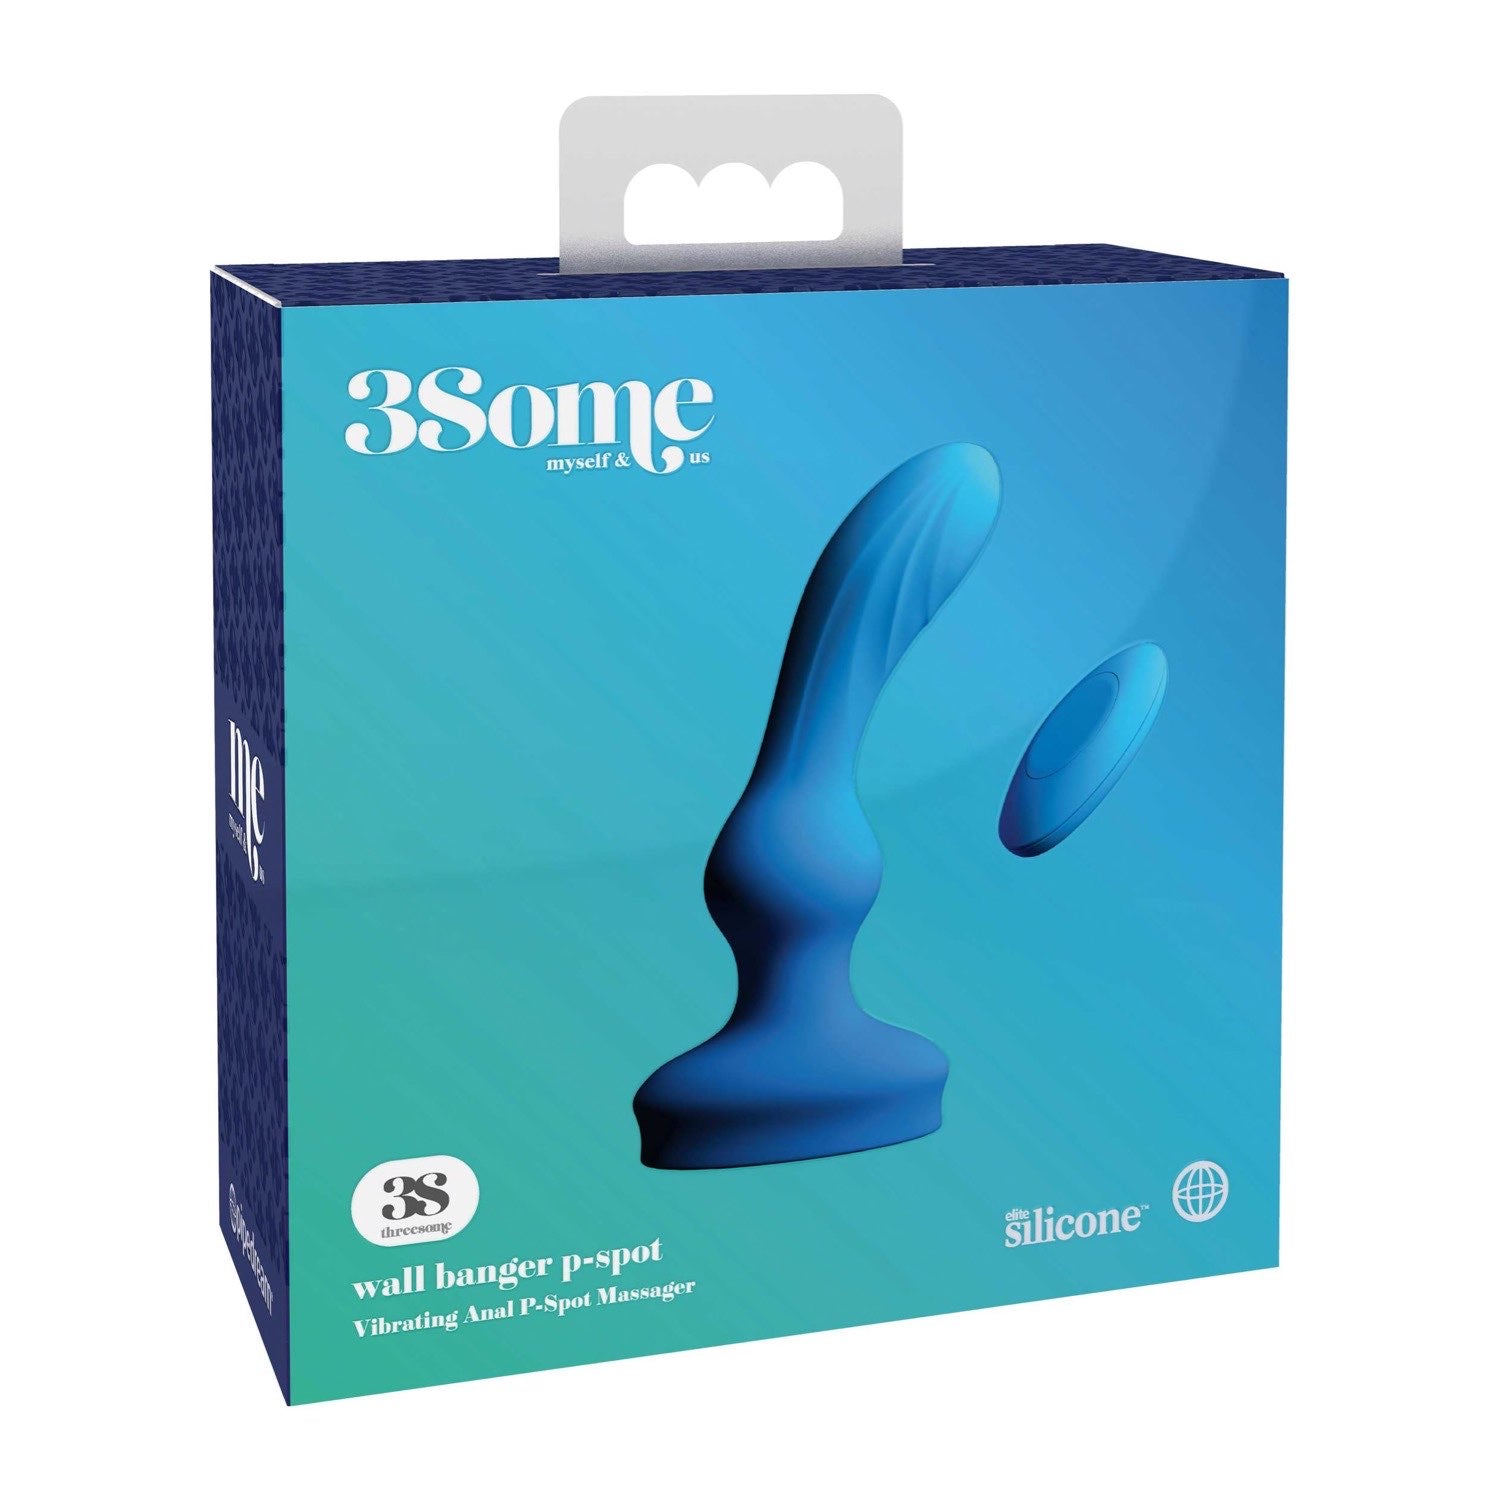 3Some Wall Banger P-Spot - Blue USB Rechargeable Vibrating Prostate Massager with Remote by Pipedream